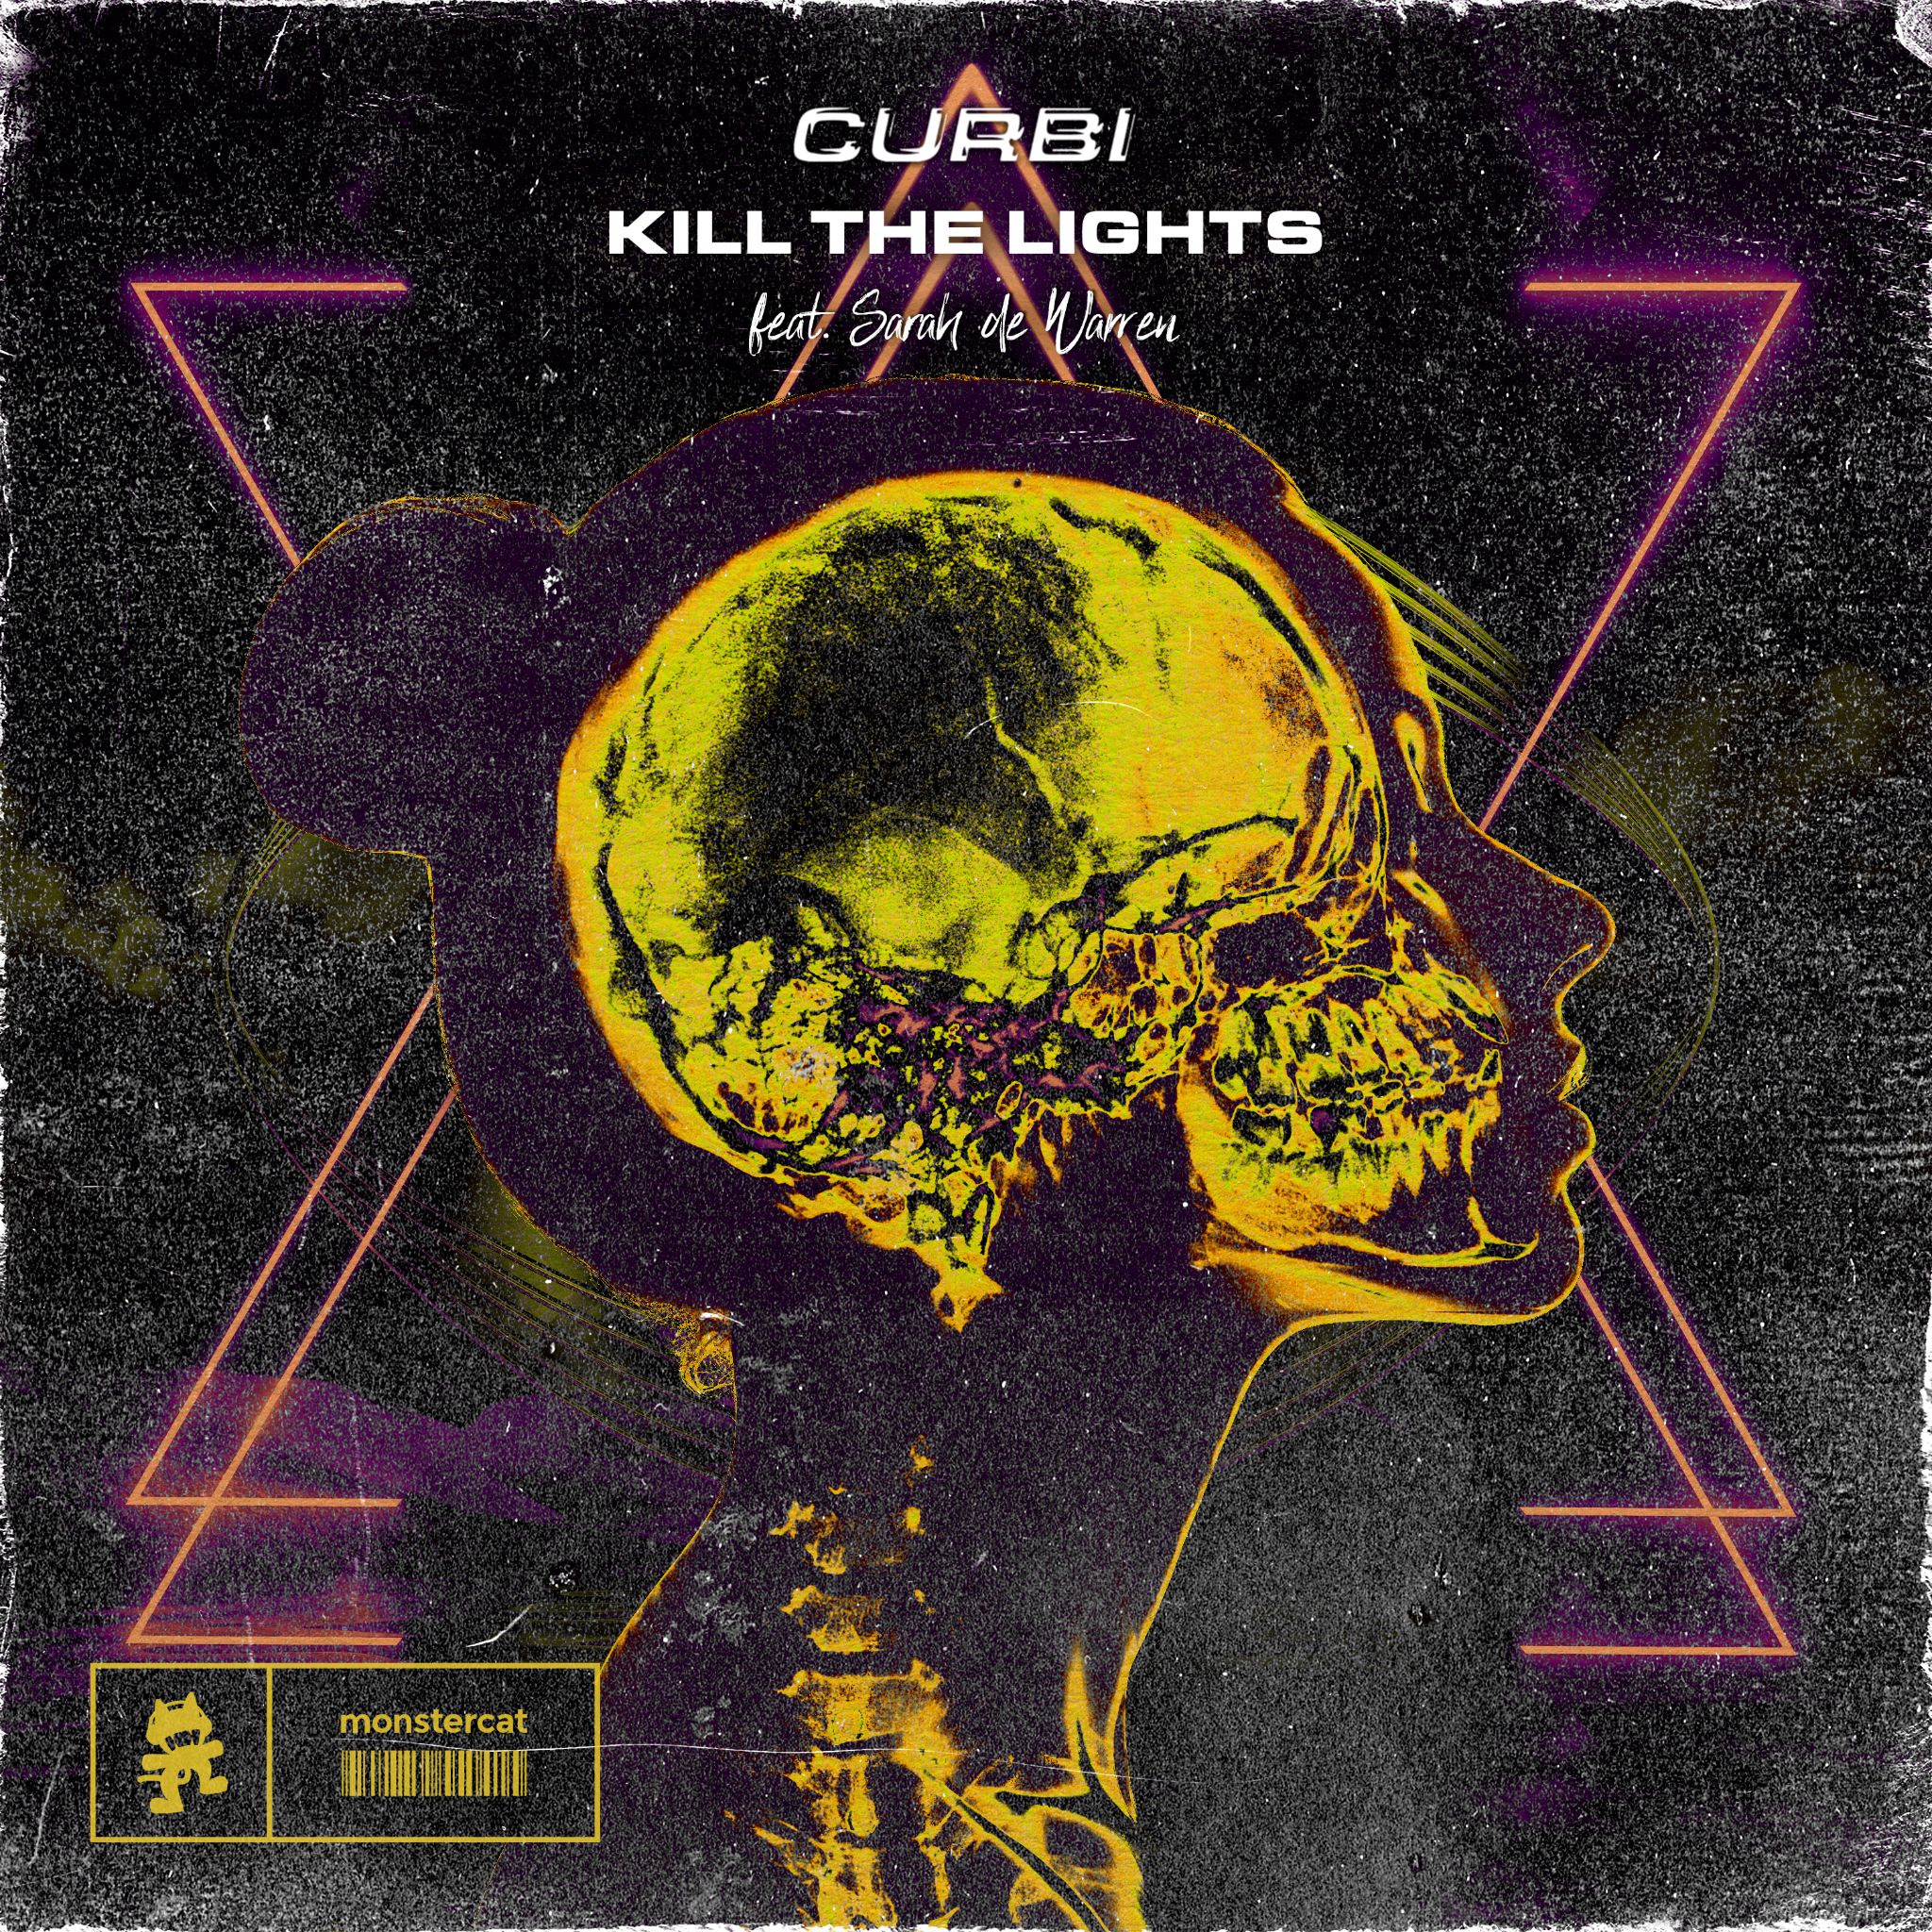 Curbi Comes Correct With Pulse-Pounding New Single “Kill The Lights”